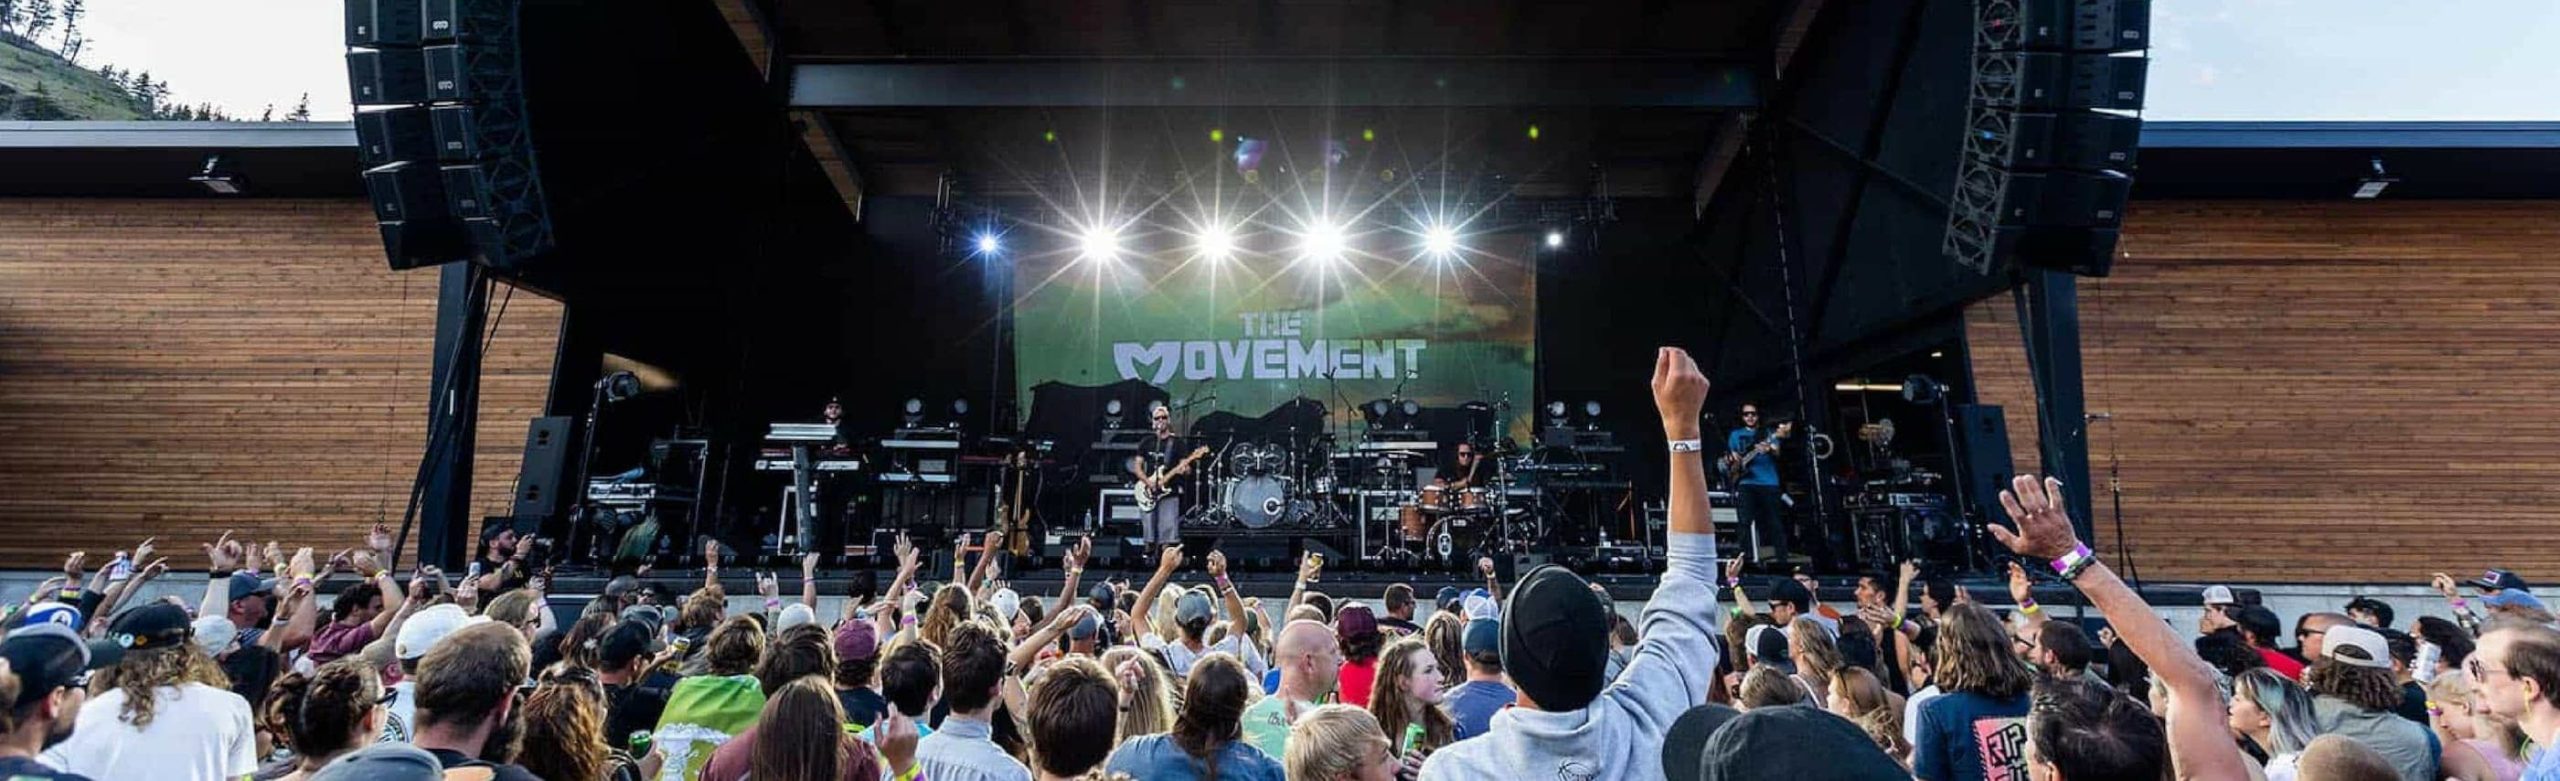 Hip Hop Meets Reggae Rock: The Movement Will Return to Missoula with Special Guest KBong Image